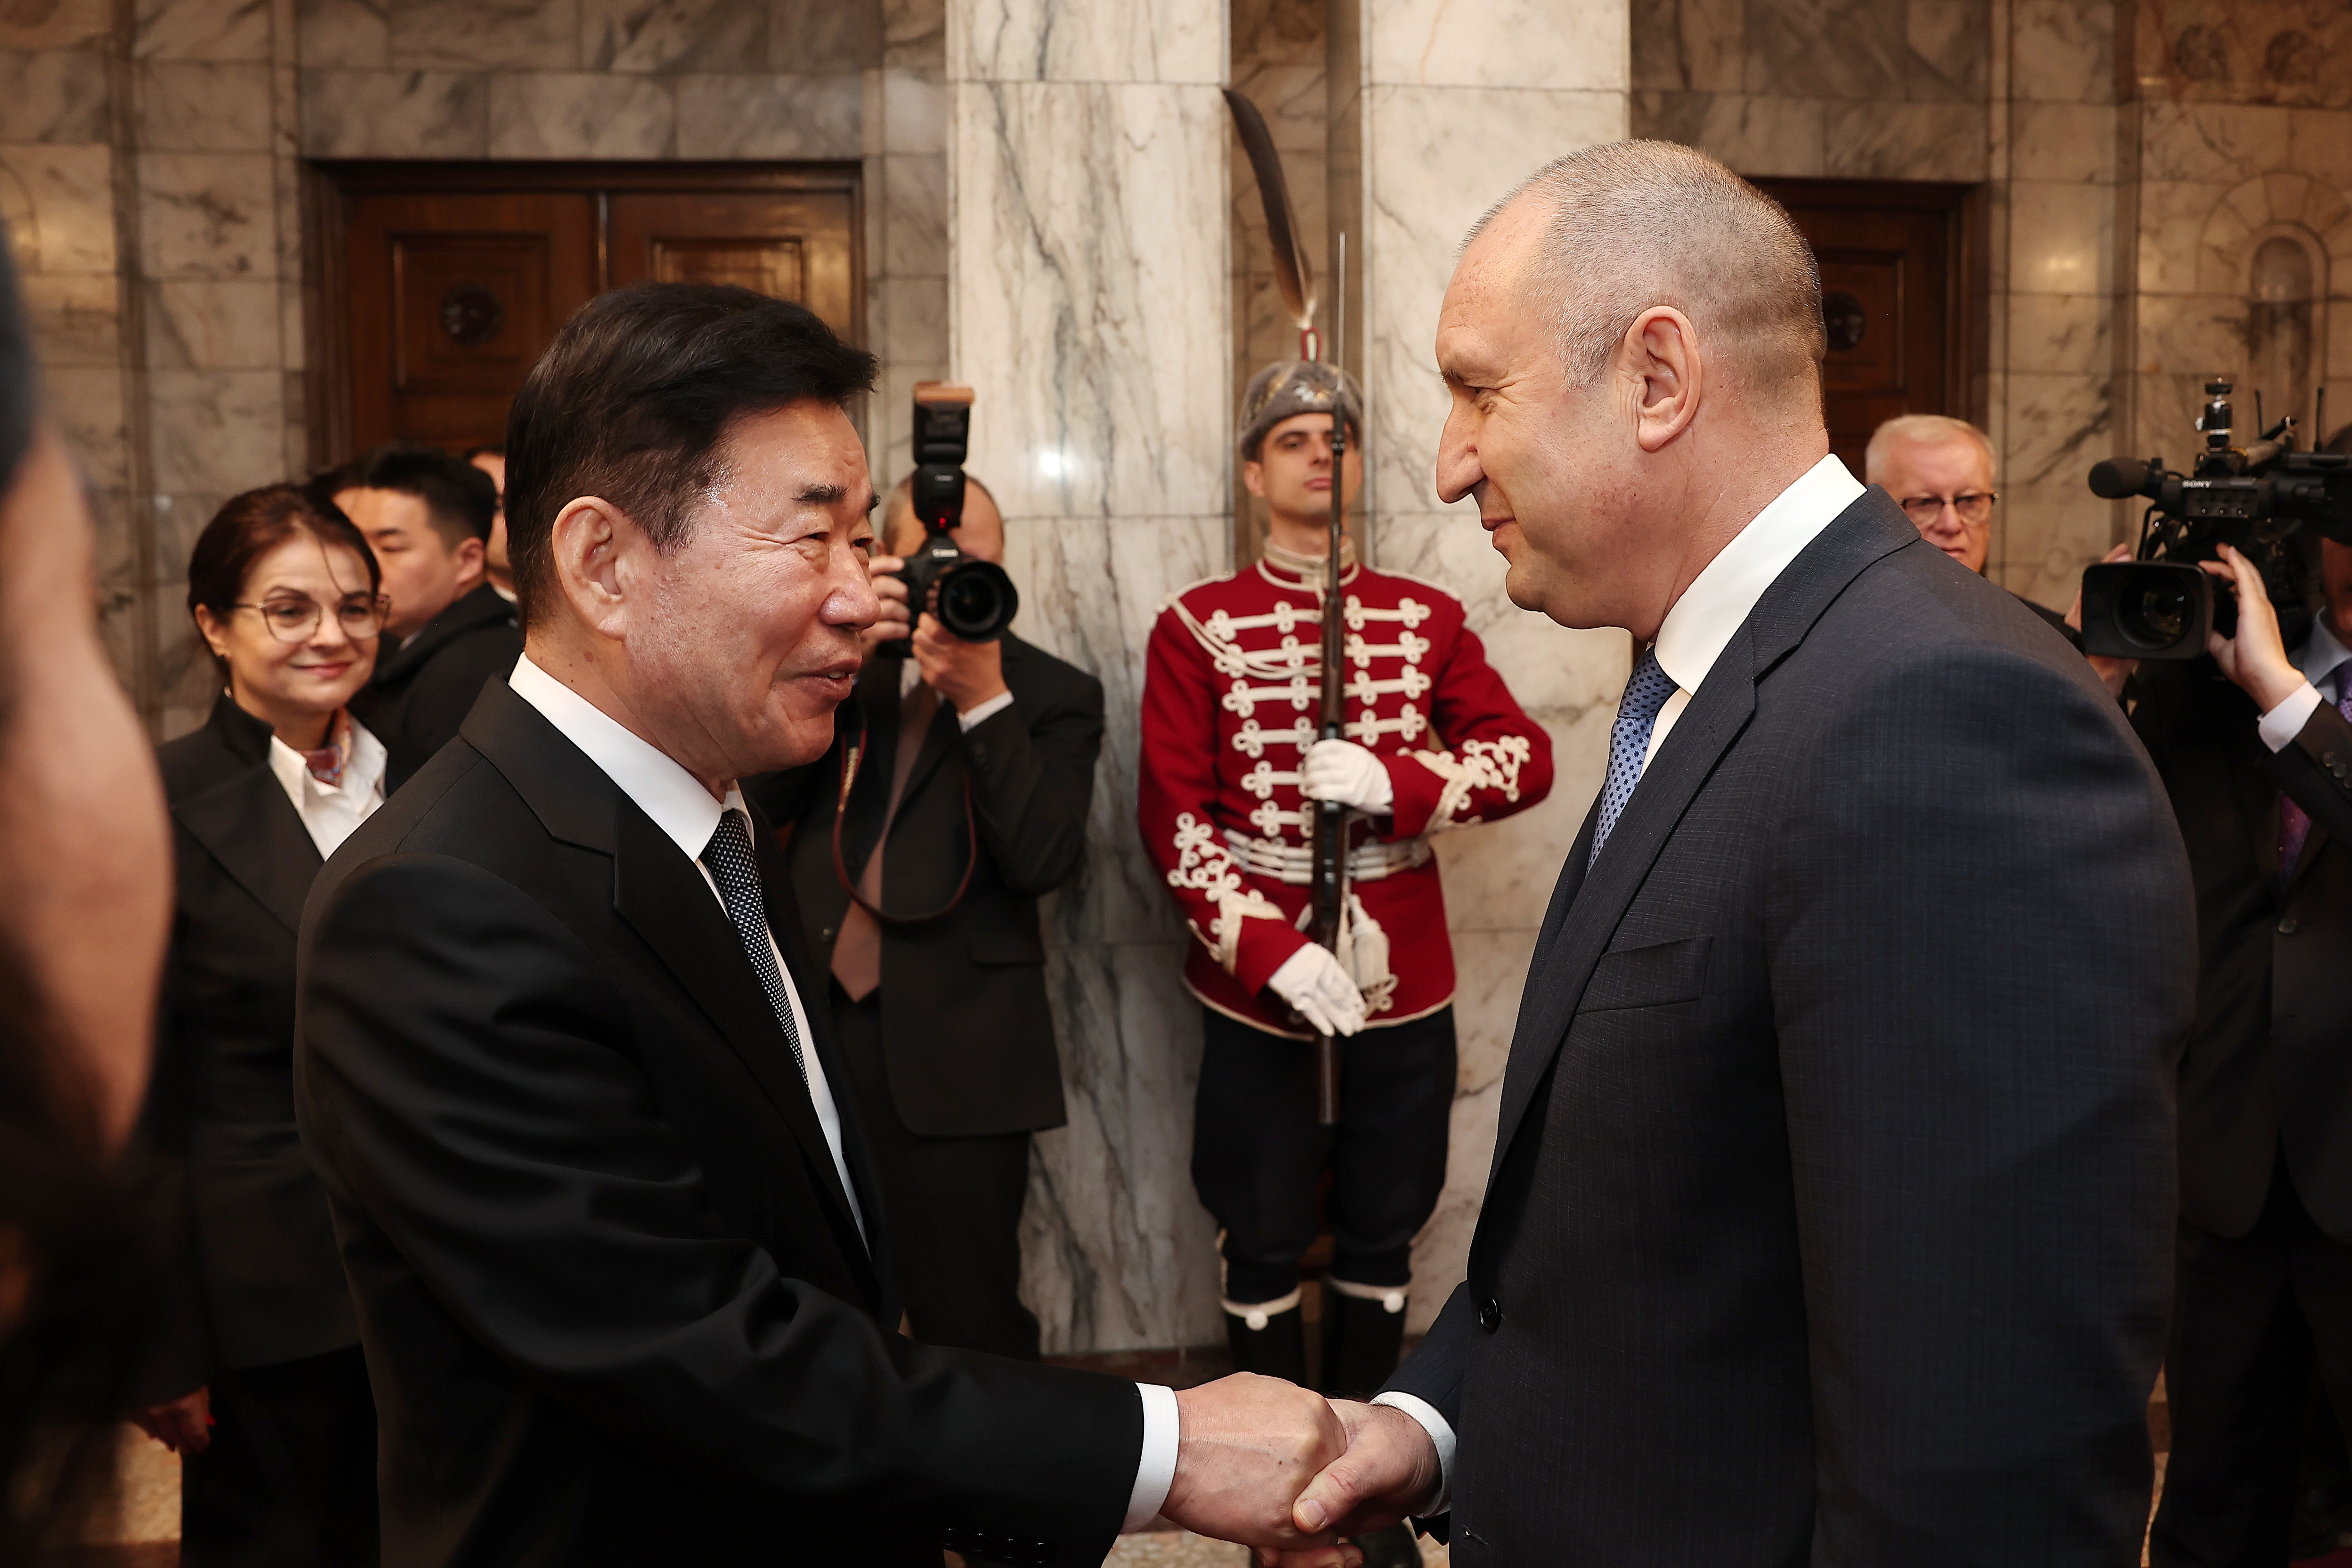 Speaker&rsquo;s economic and sales diplomacy helps Korea win Bulgarian nuclear power plant project 관련사진 1 보기